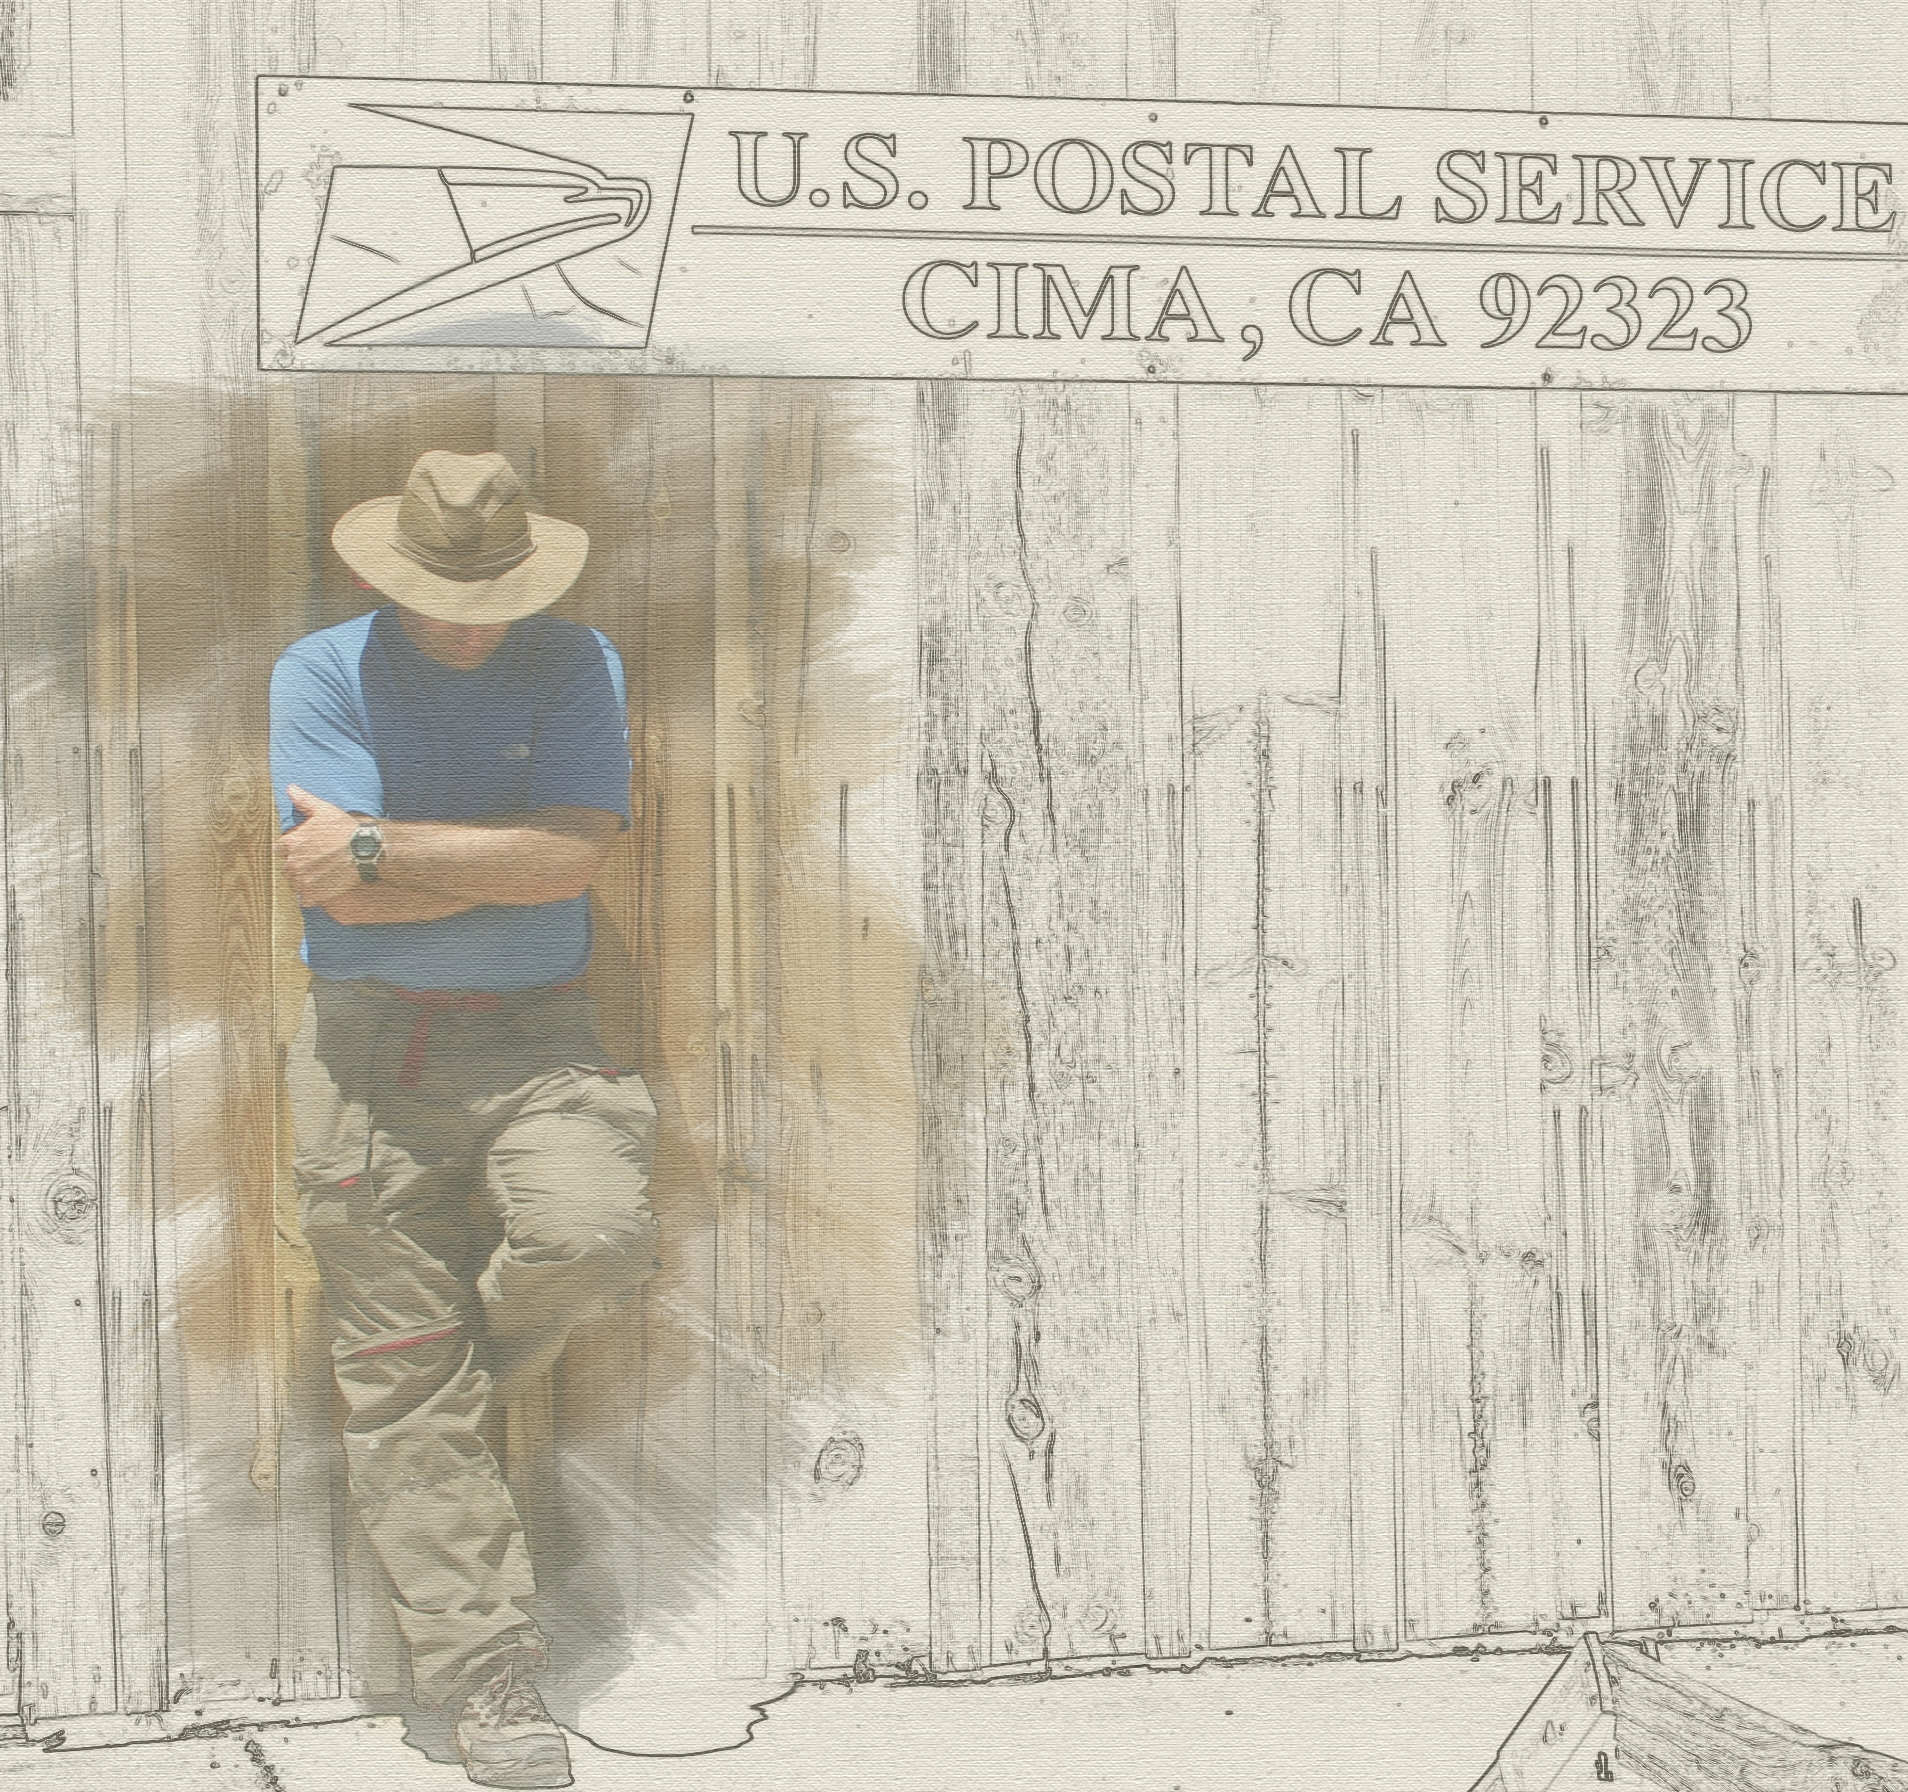 an artistic, stylized rendering of a man standing at a post office